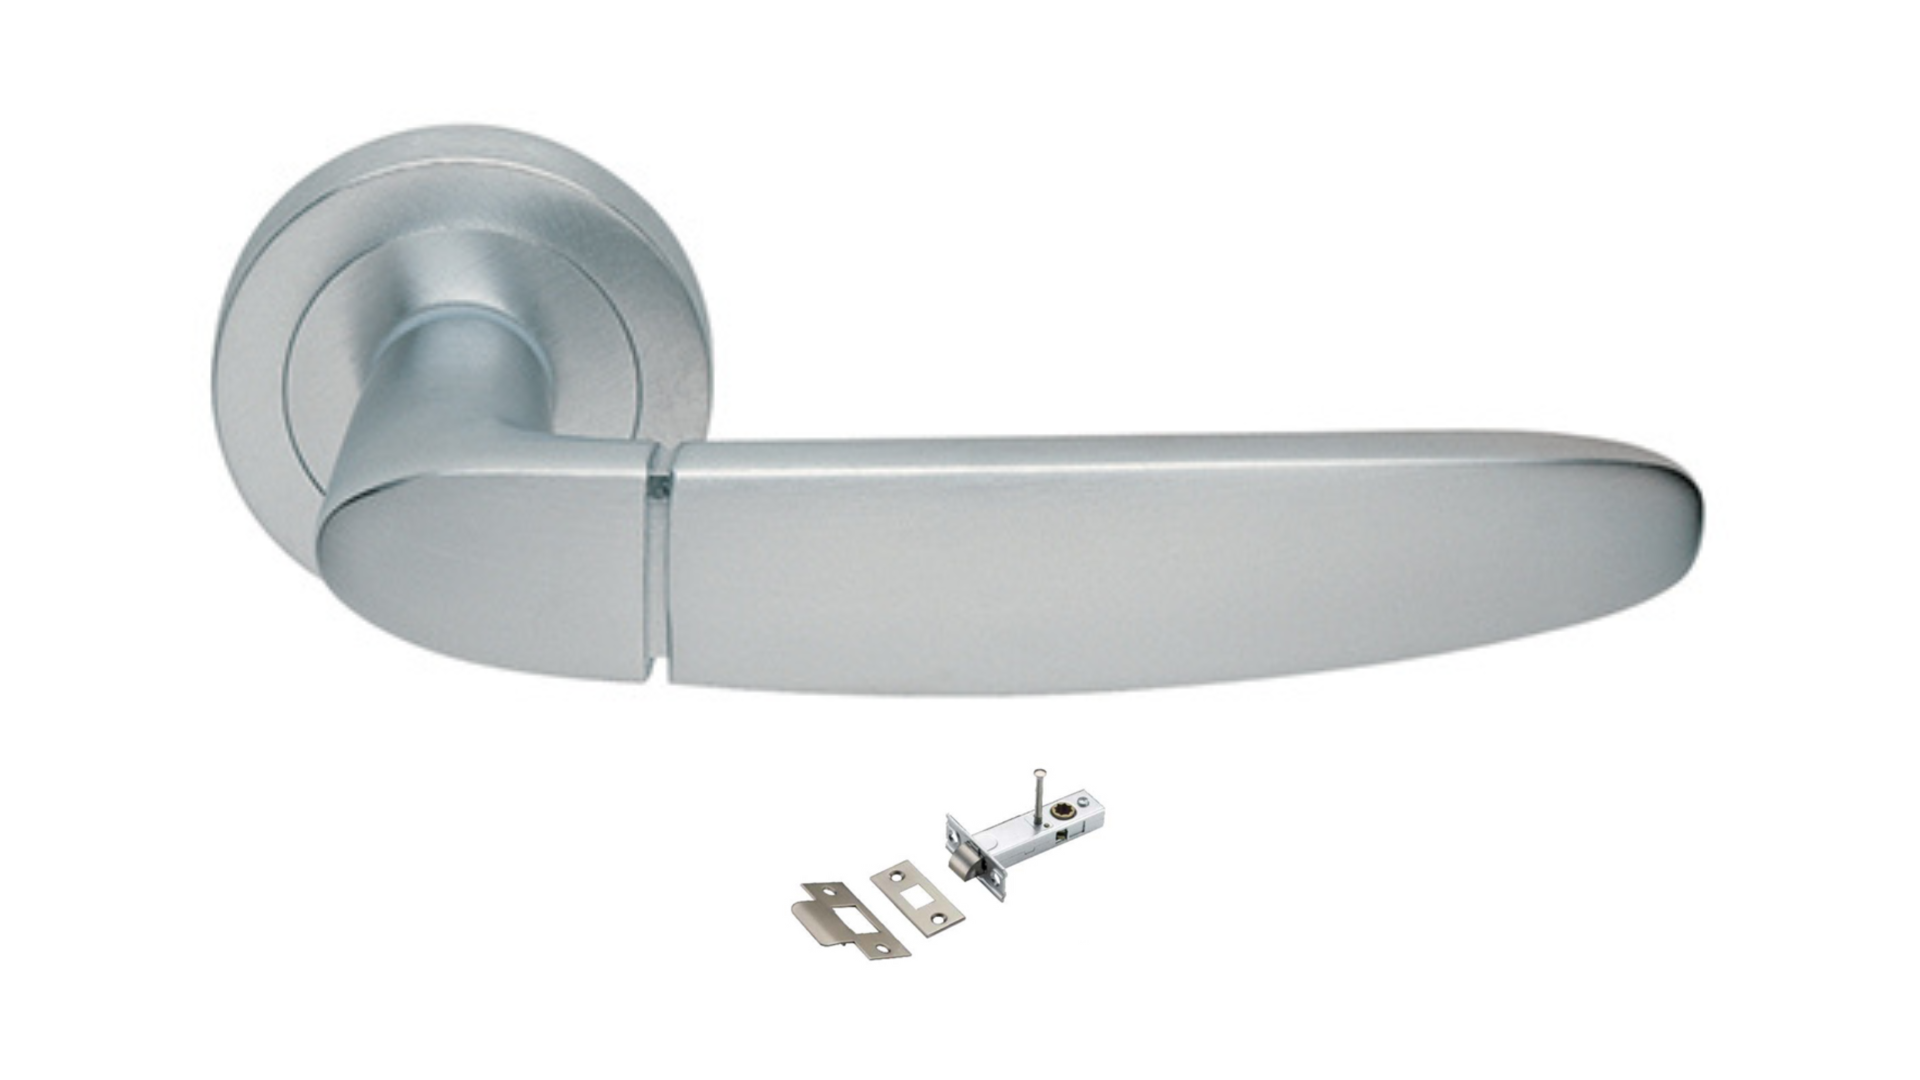 The Atena door handle in Satin Chrome with privacy latch included on a white background.